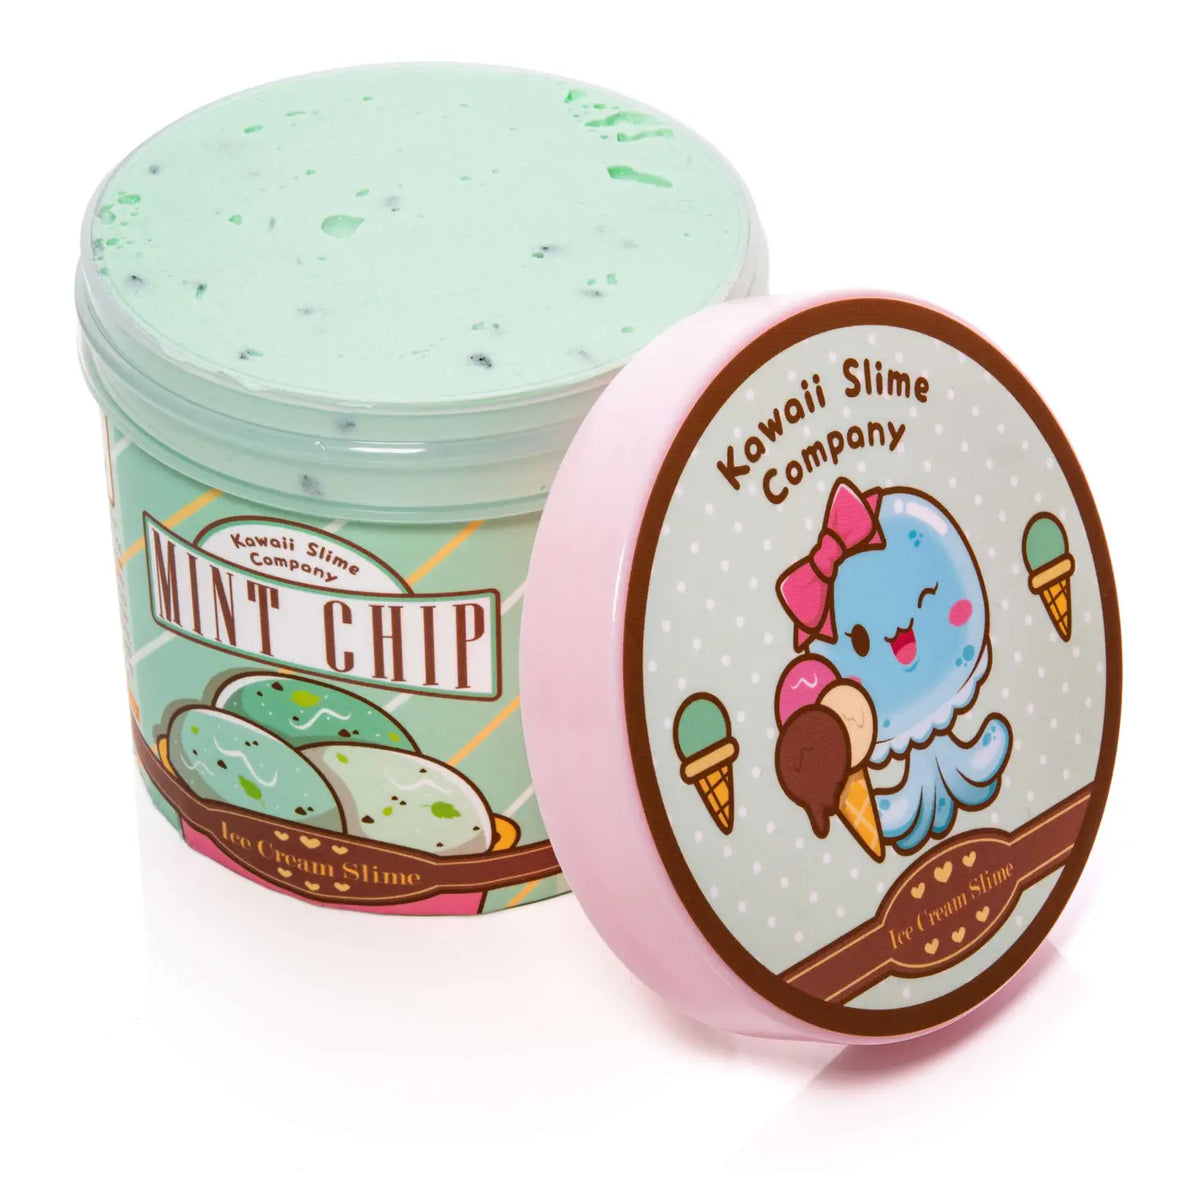 Ice Cream Pint Slime: Mint Chocolate Chip Cover